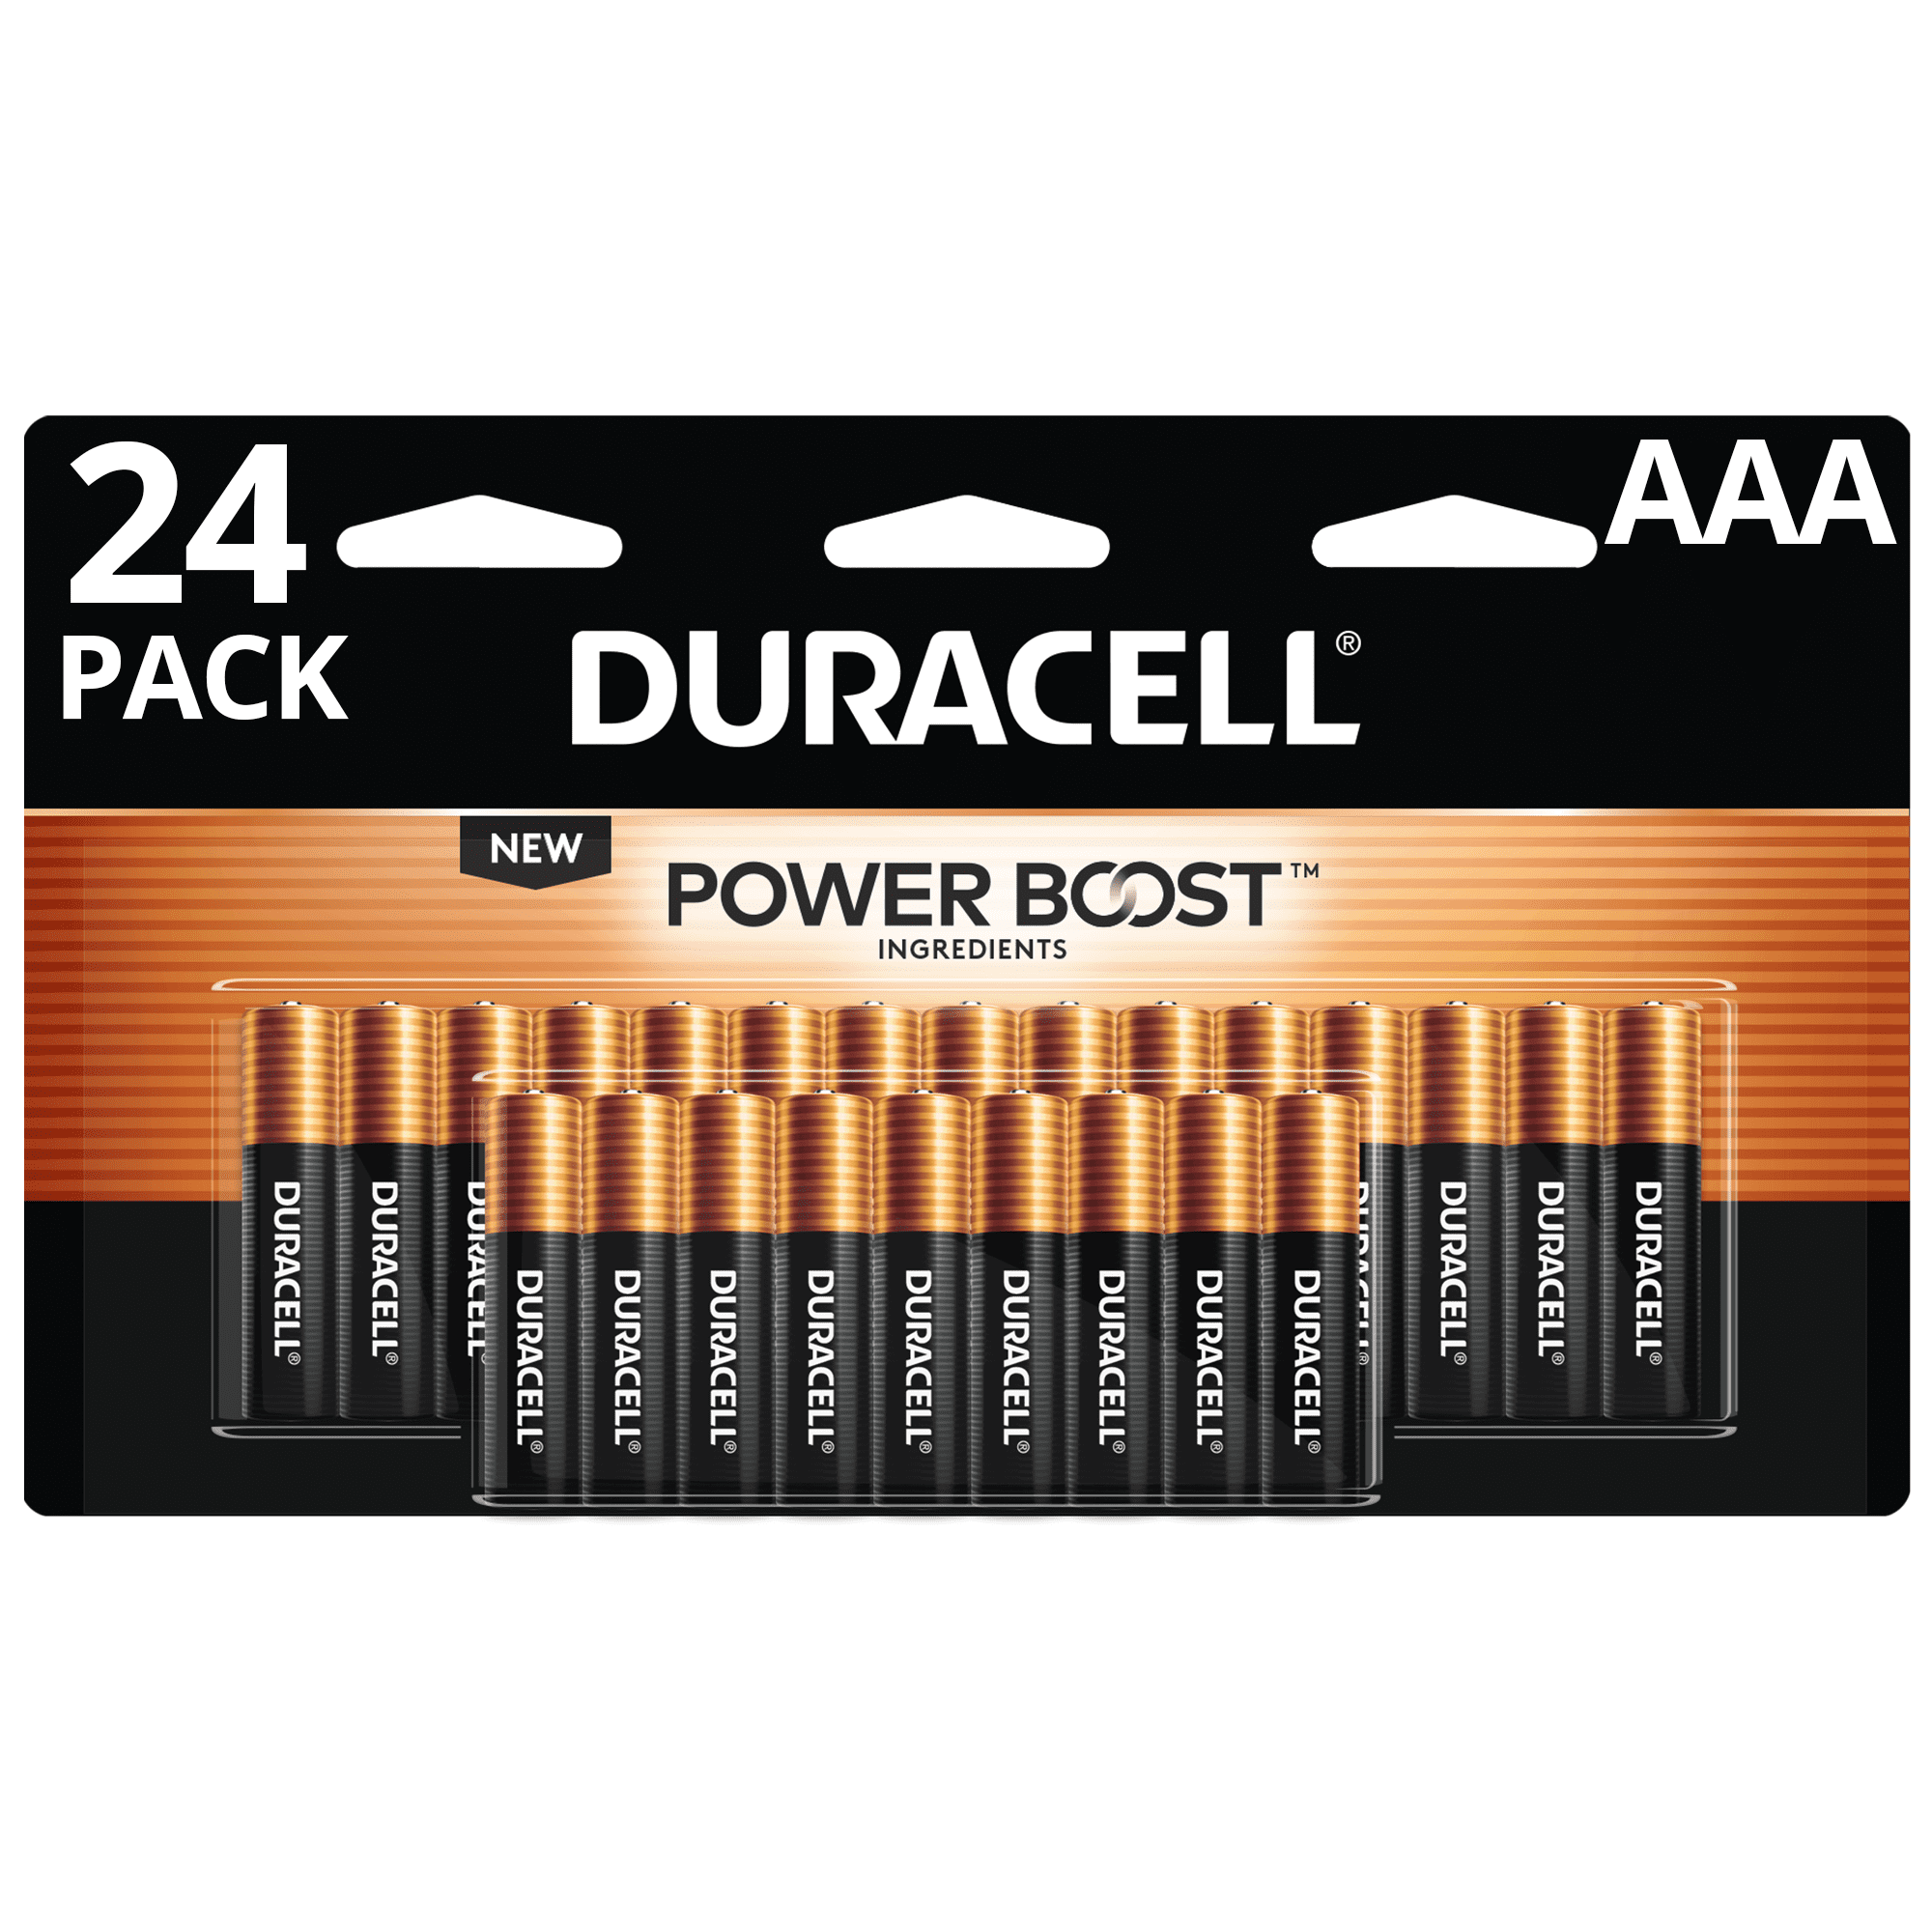 Duracell CopperTop AAA Alkaline Batteries Pack of 24 all-purpose Triple A battery for household and business long lasting 